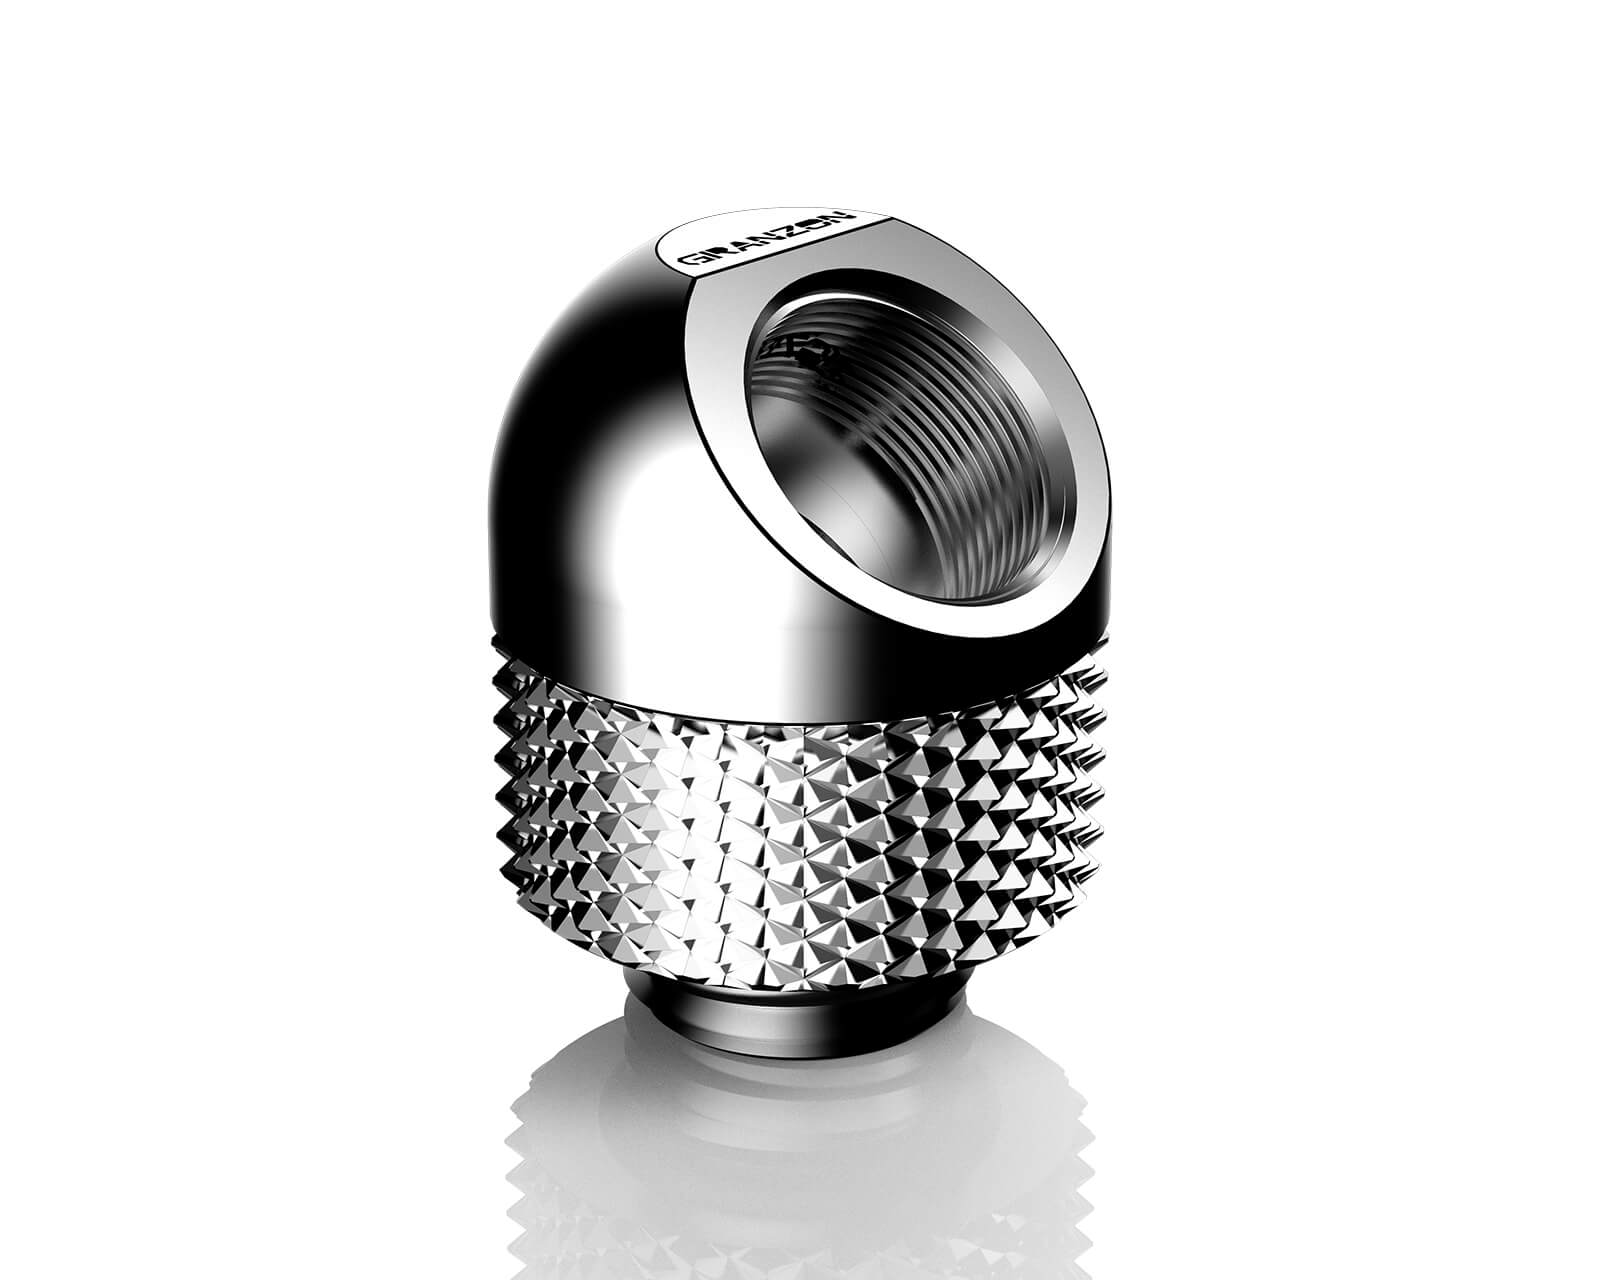 Granzon G 1/4in. Male to Female 45 Degree Rotary Elbow Fitting (GD-45) - PrimoChill - KEEPING IT COOL Silver